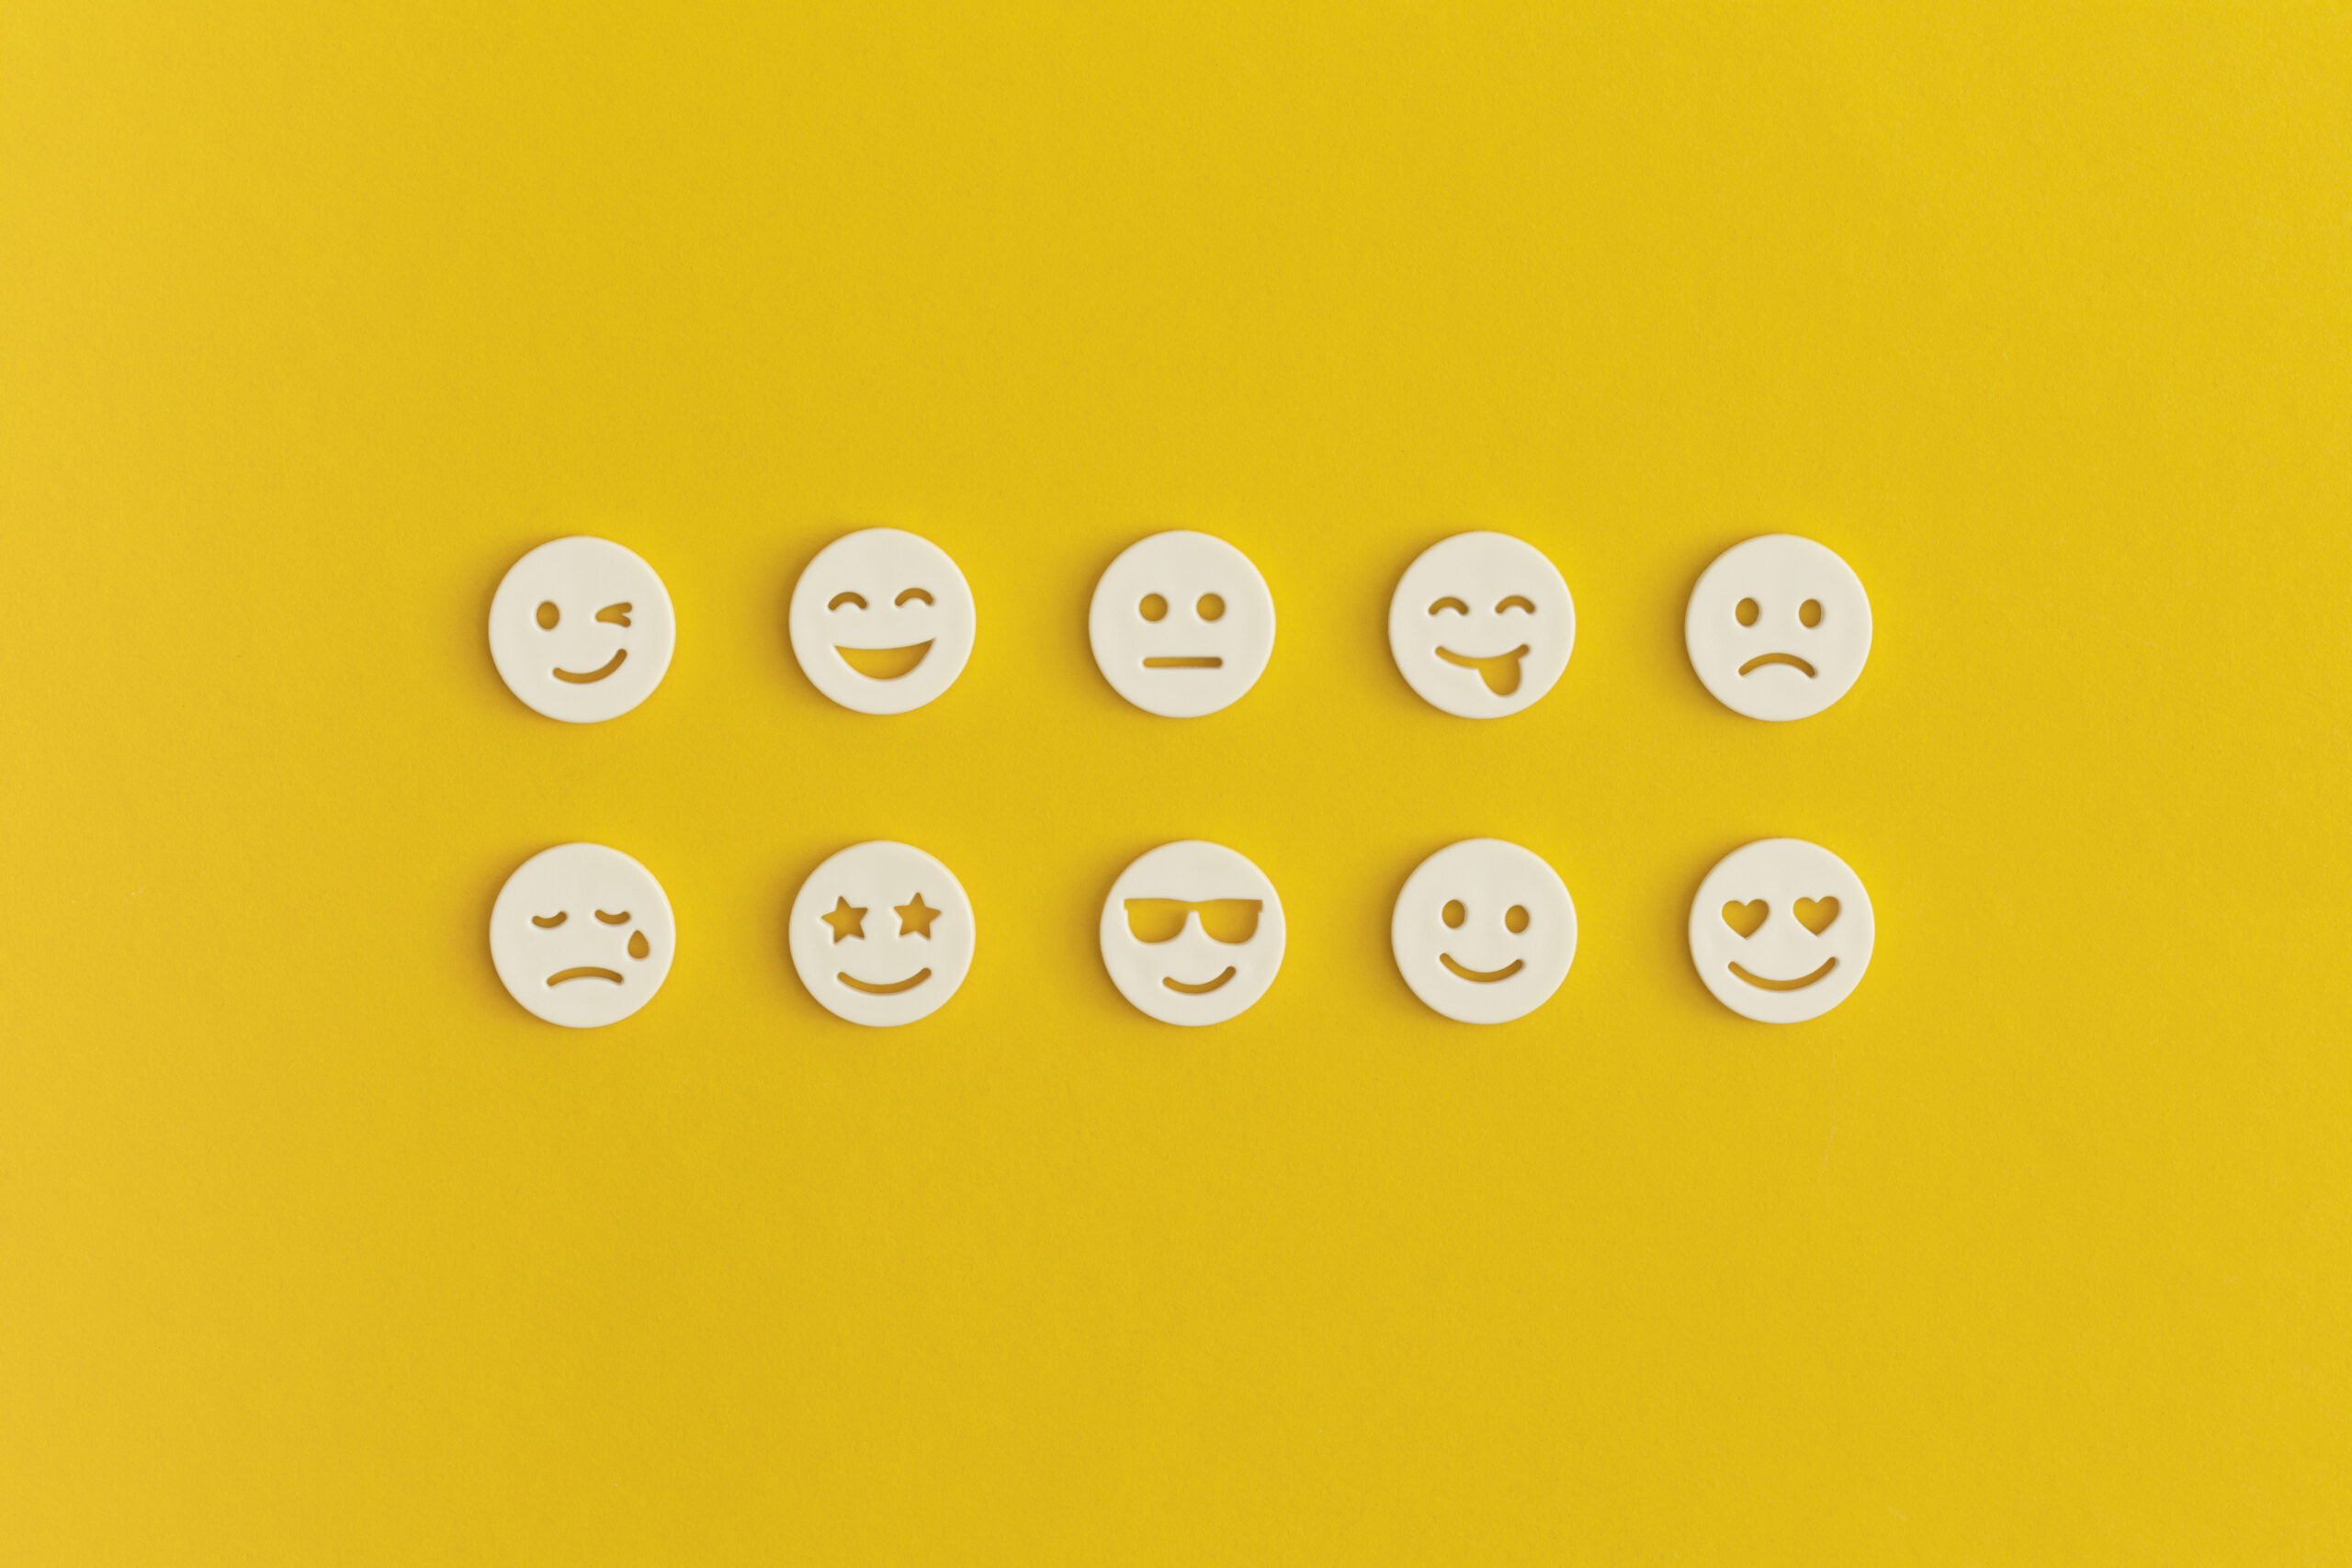 Emoticon smile on a yellow background. Customer feedback.